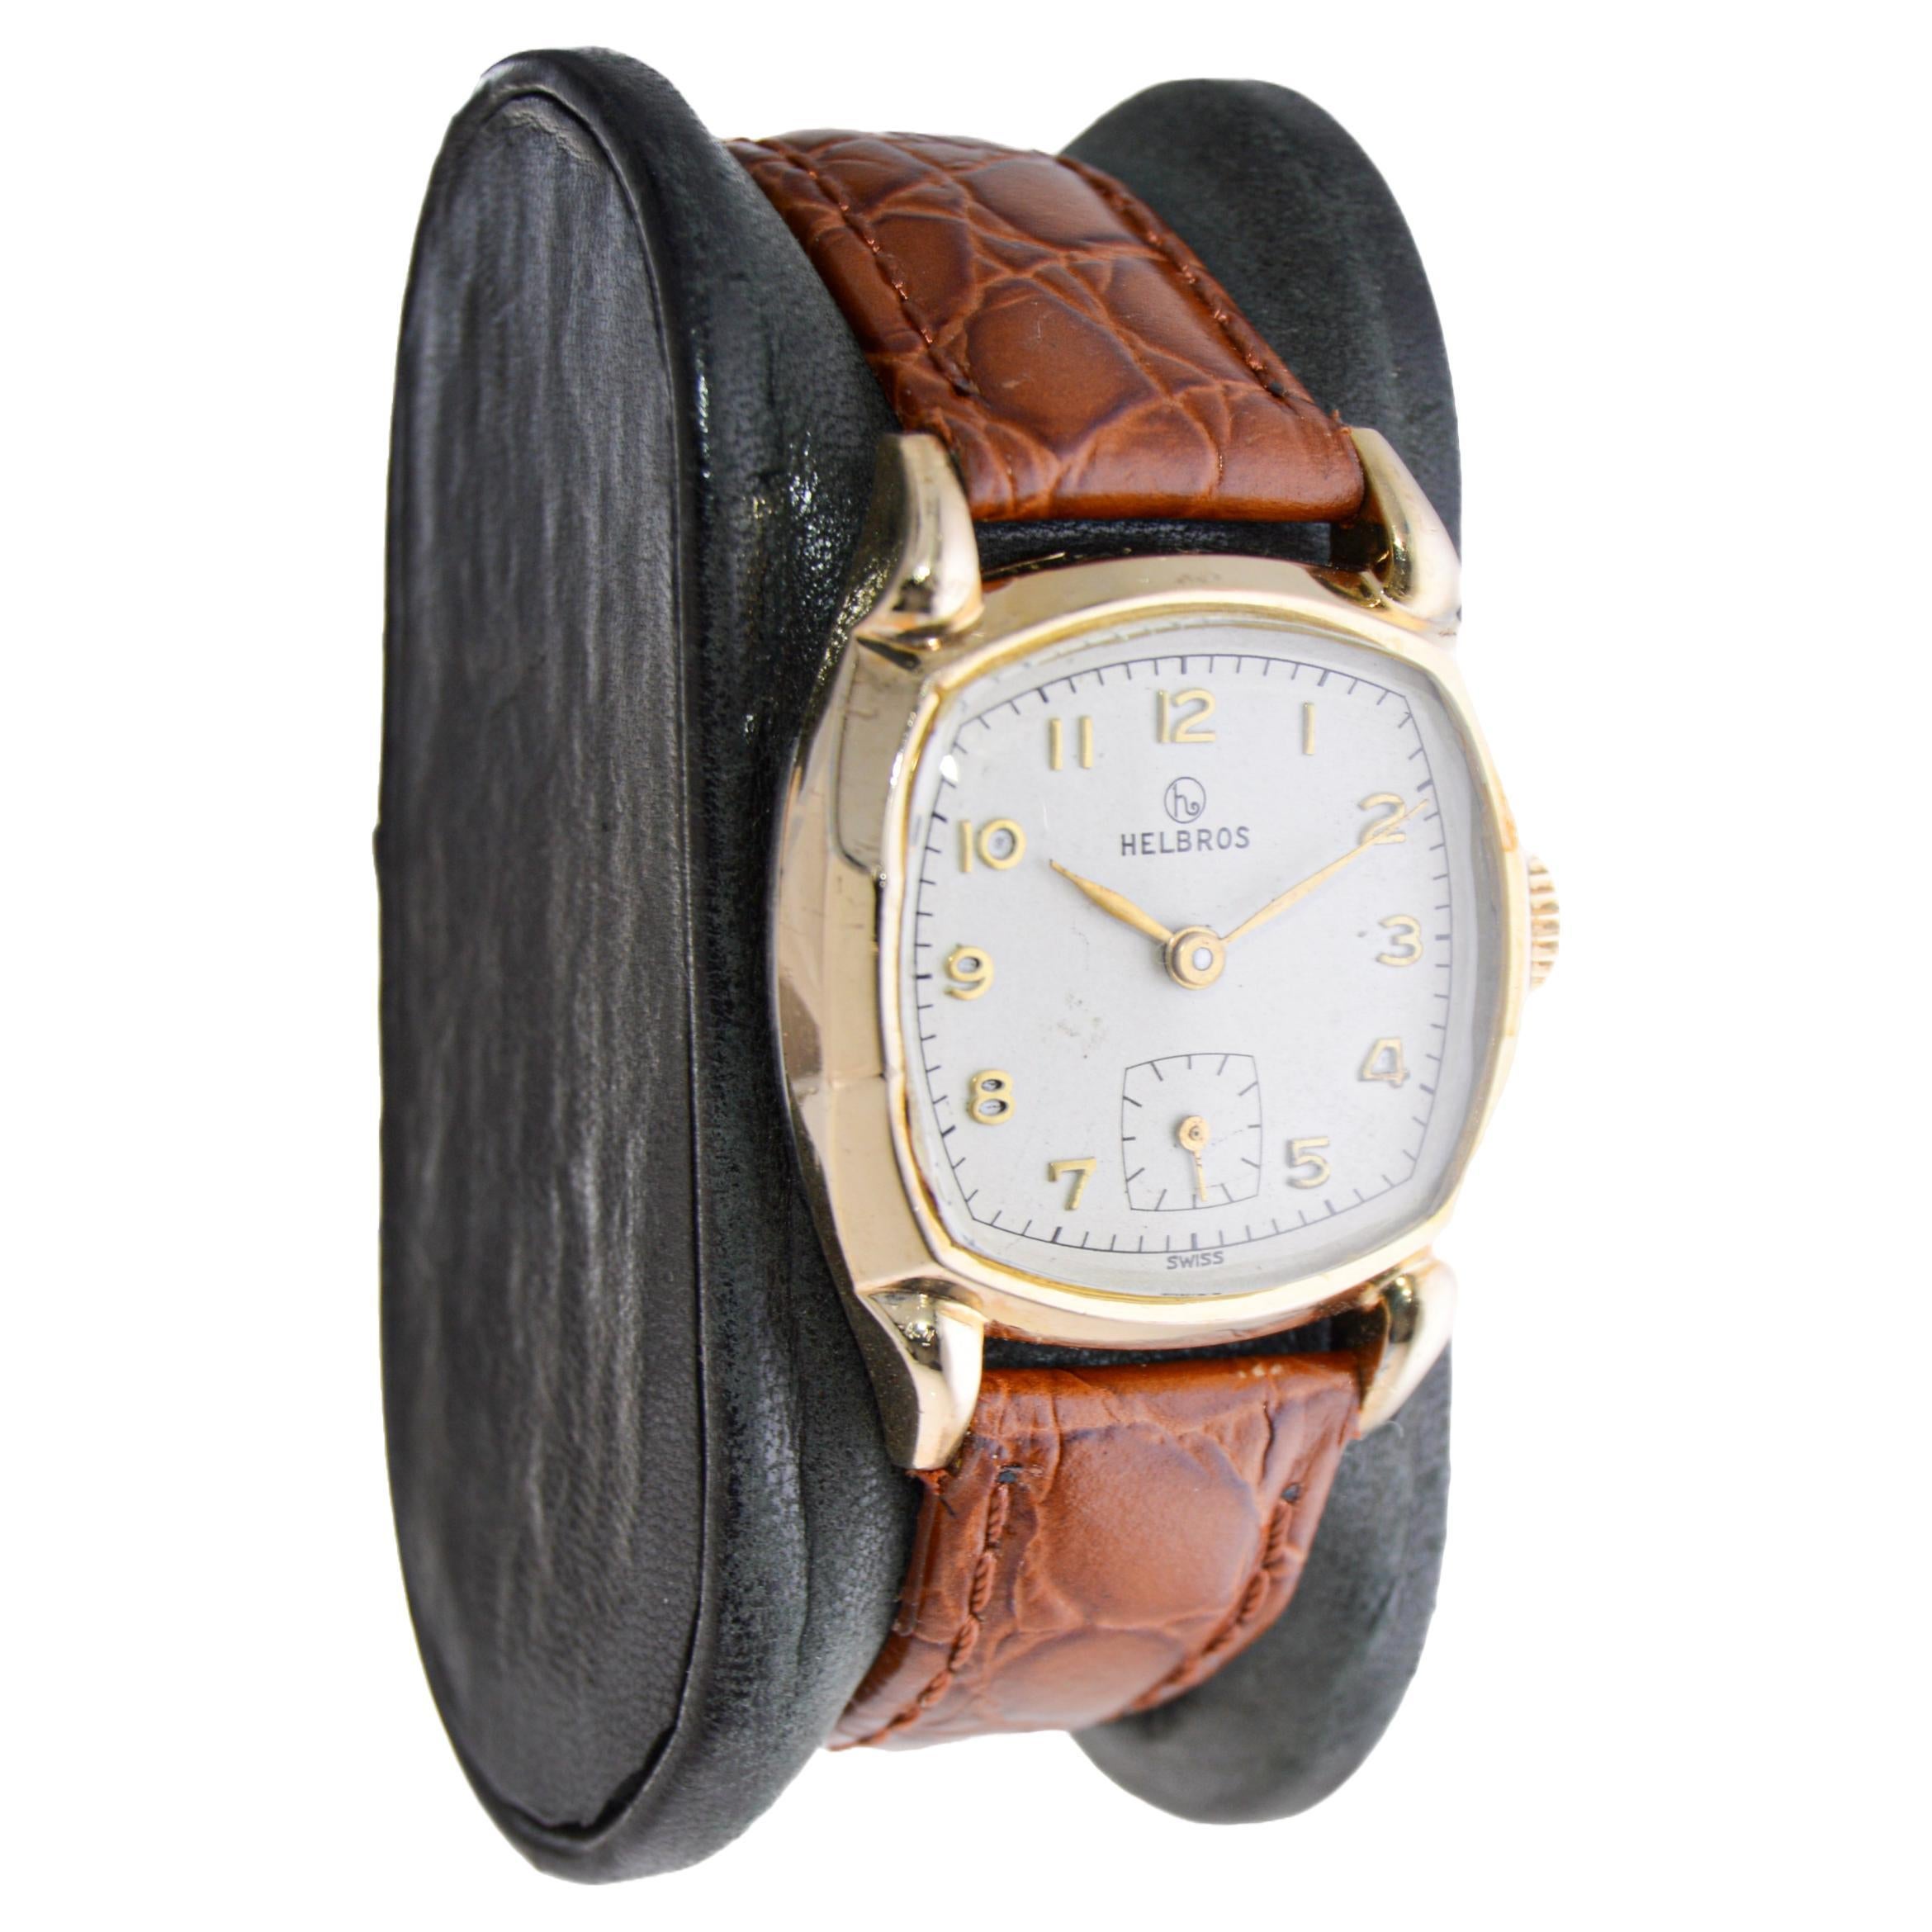 FACTORY / HOUSE: Helbros Watch Company
STYLE / REFERENCE: Art Deco / Cushion Shape
METAL / MATERIAL: Yellow Gold-Filled
CIRCA / YEAR: 1940's
DIMENSIONS / SIZE: 37mm Length X 29mm Diameter
MOVEMENT / CALIBER: Manual Winding / 17 Jewels / Caliber